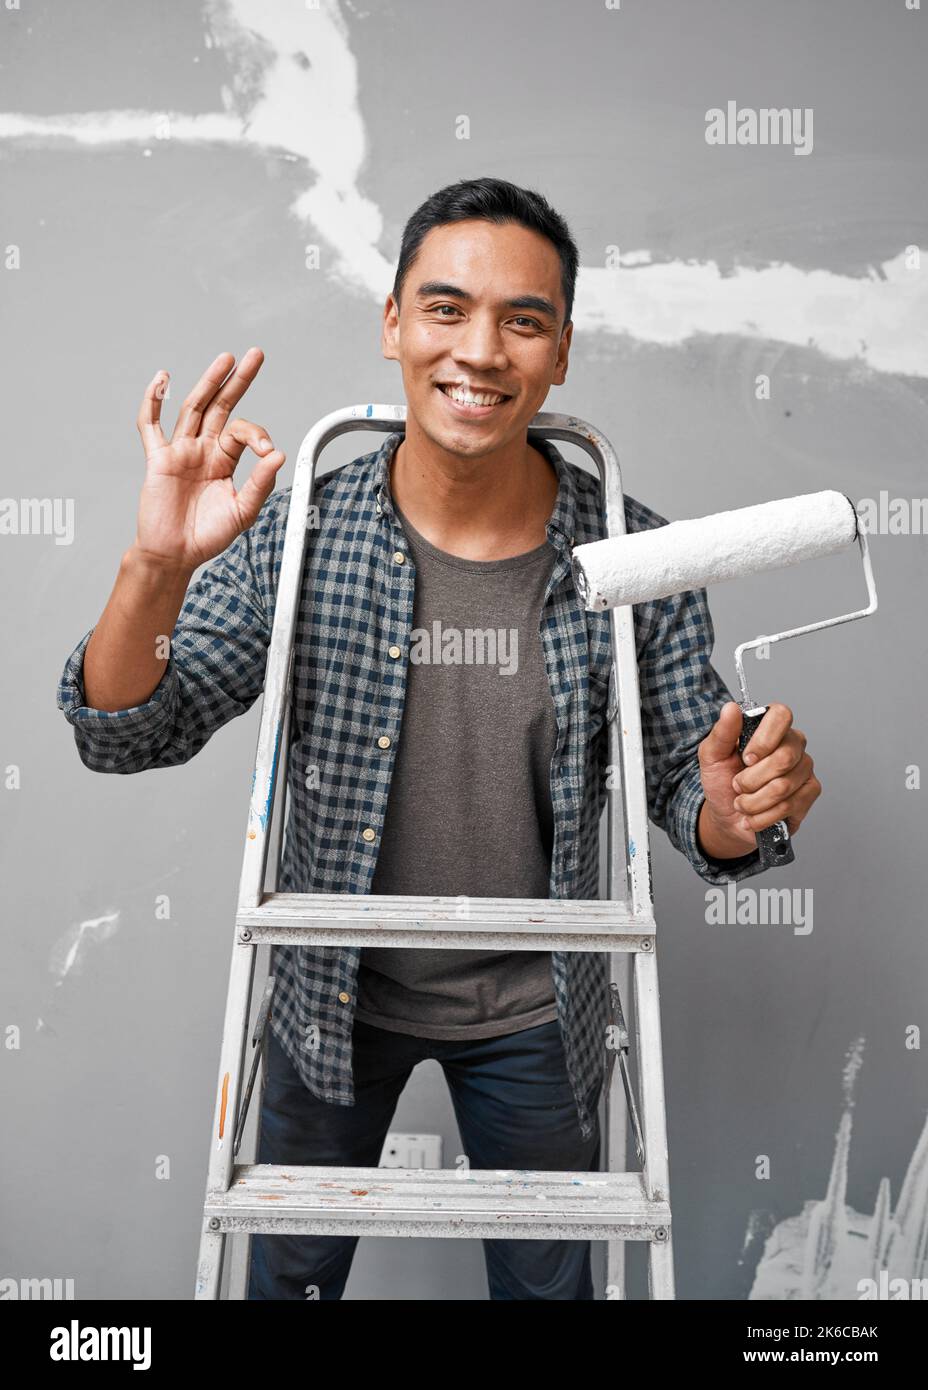 An attractive Asian man shows OK hand gesture while preparing to paint Stock Photo